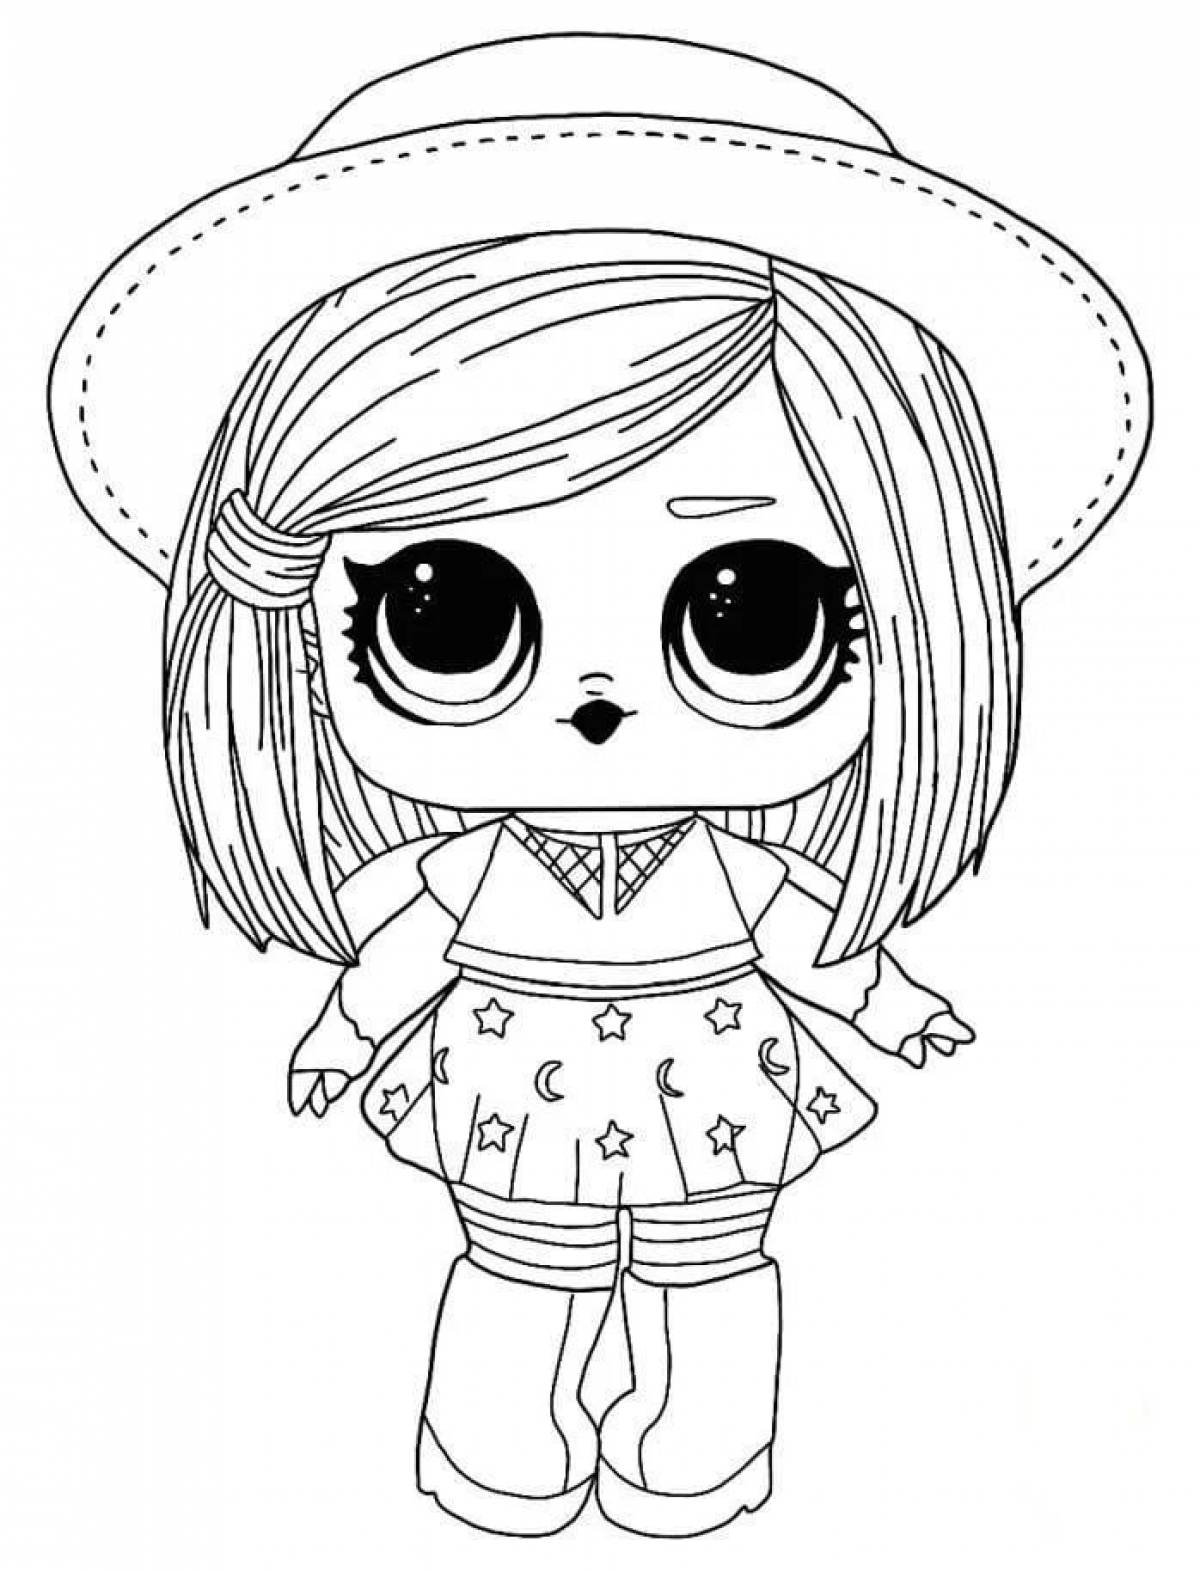 Coloring book for girls doll lol #11